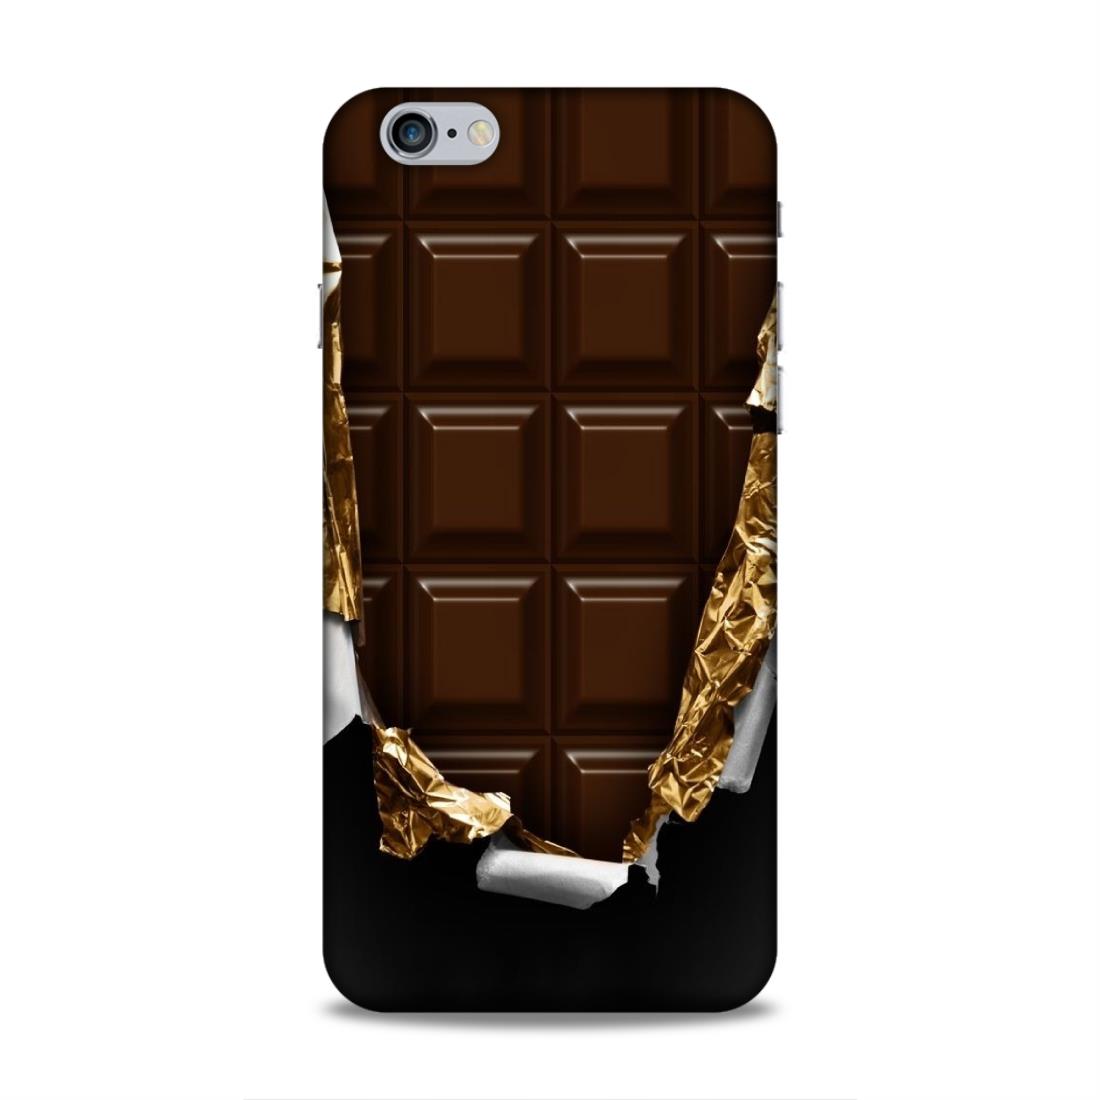 Chocolate Hard Back Case For Apple iPhone 6 Plus / 6s Plus